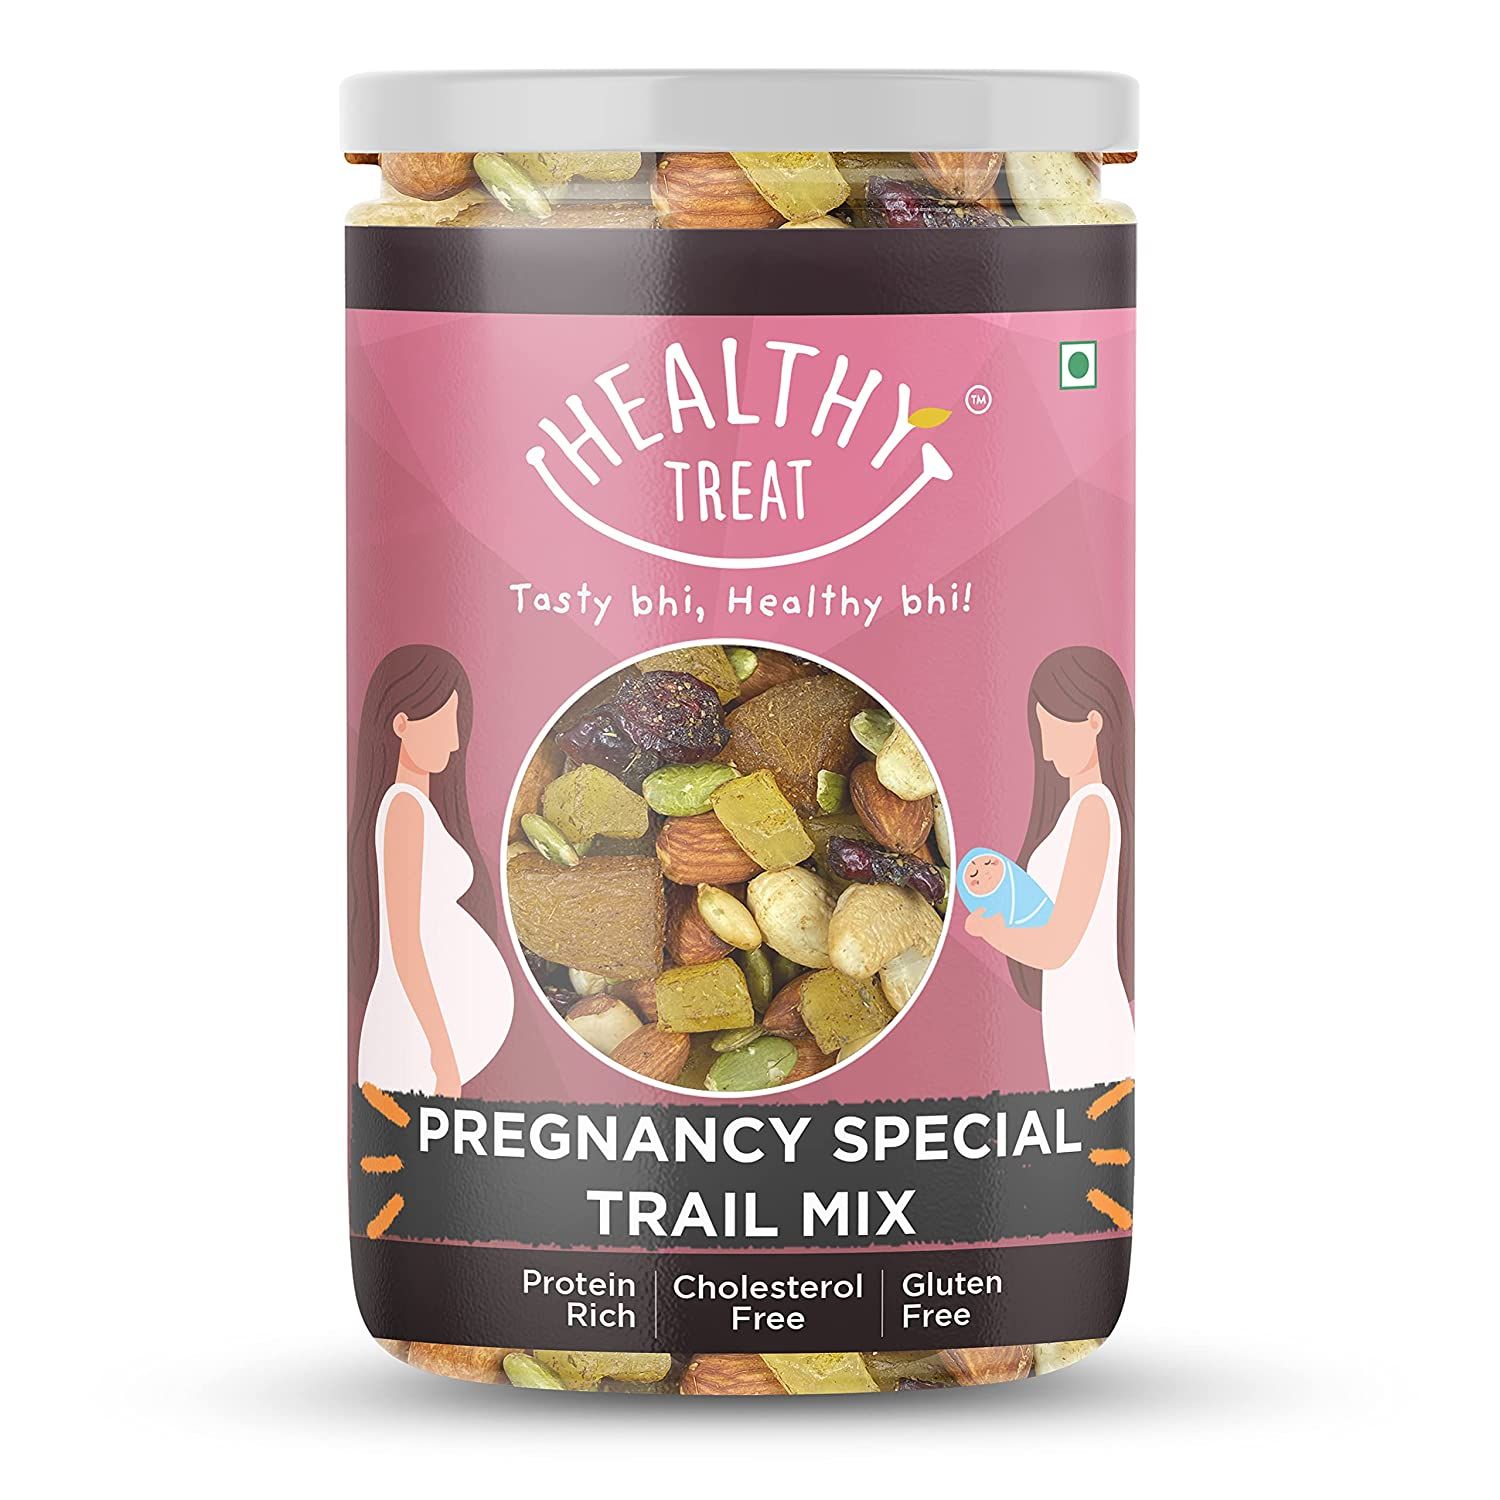 Healthy Treat Pregnancy Special Trail Mix Image